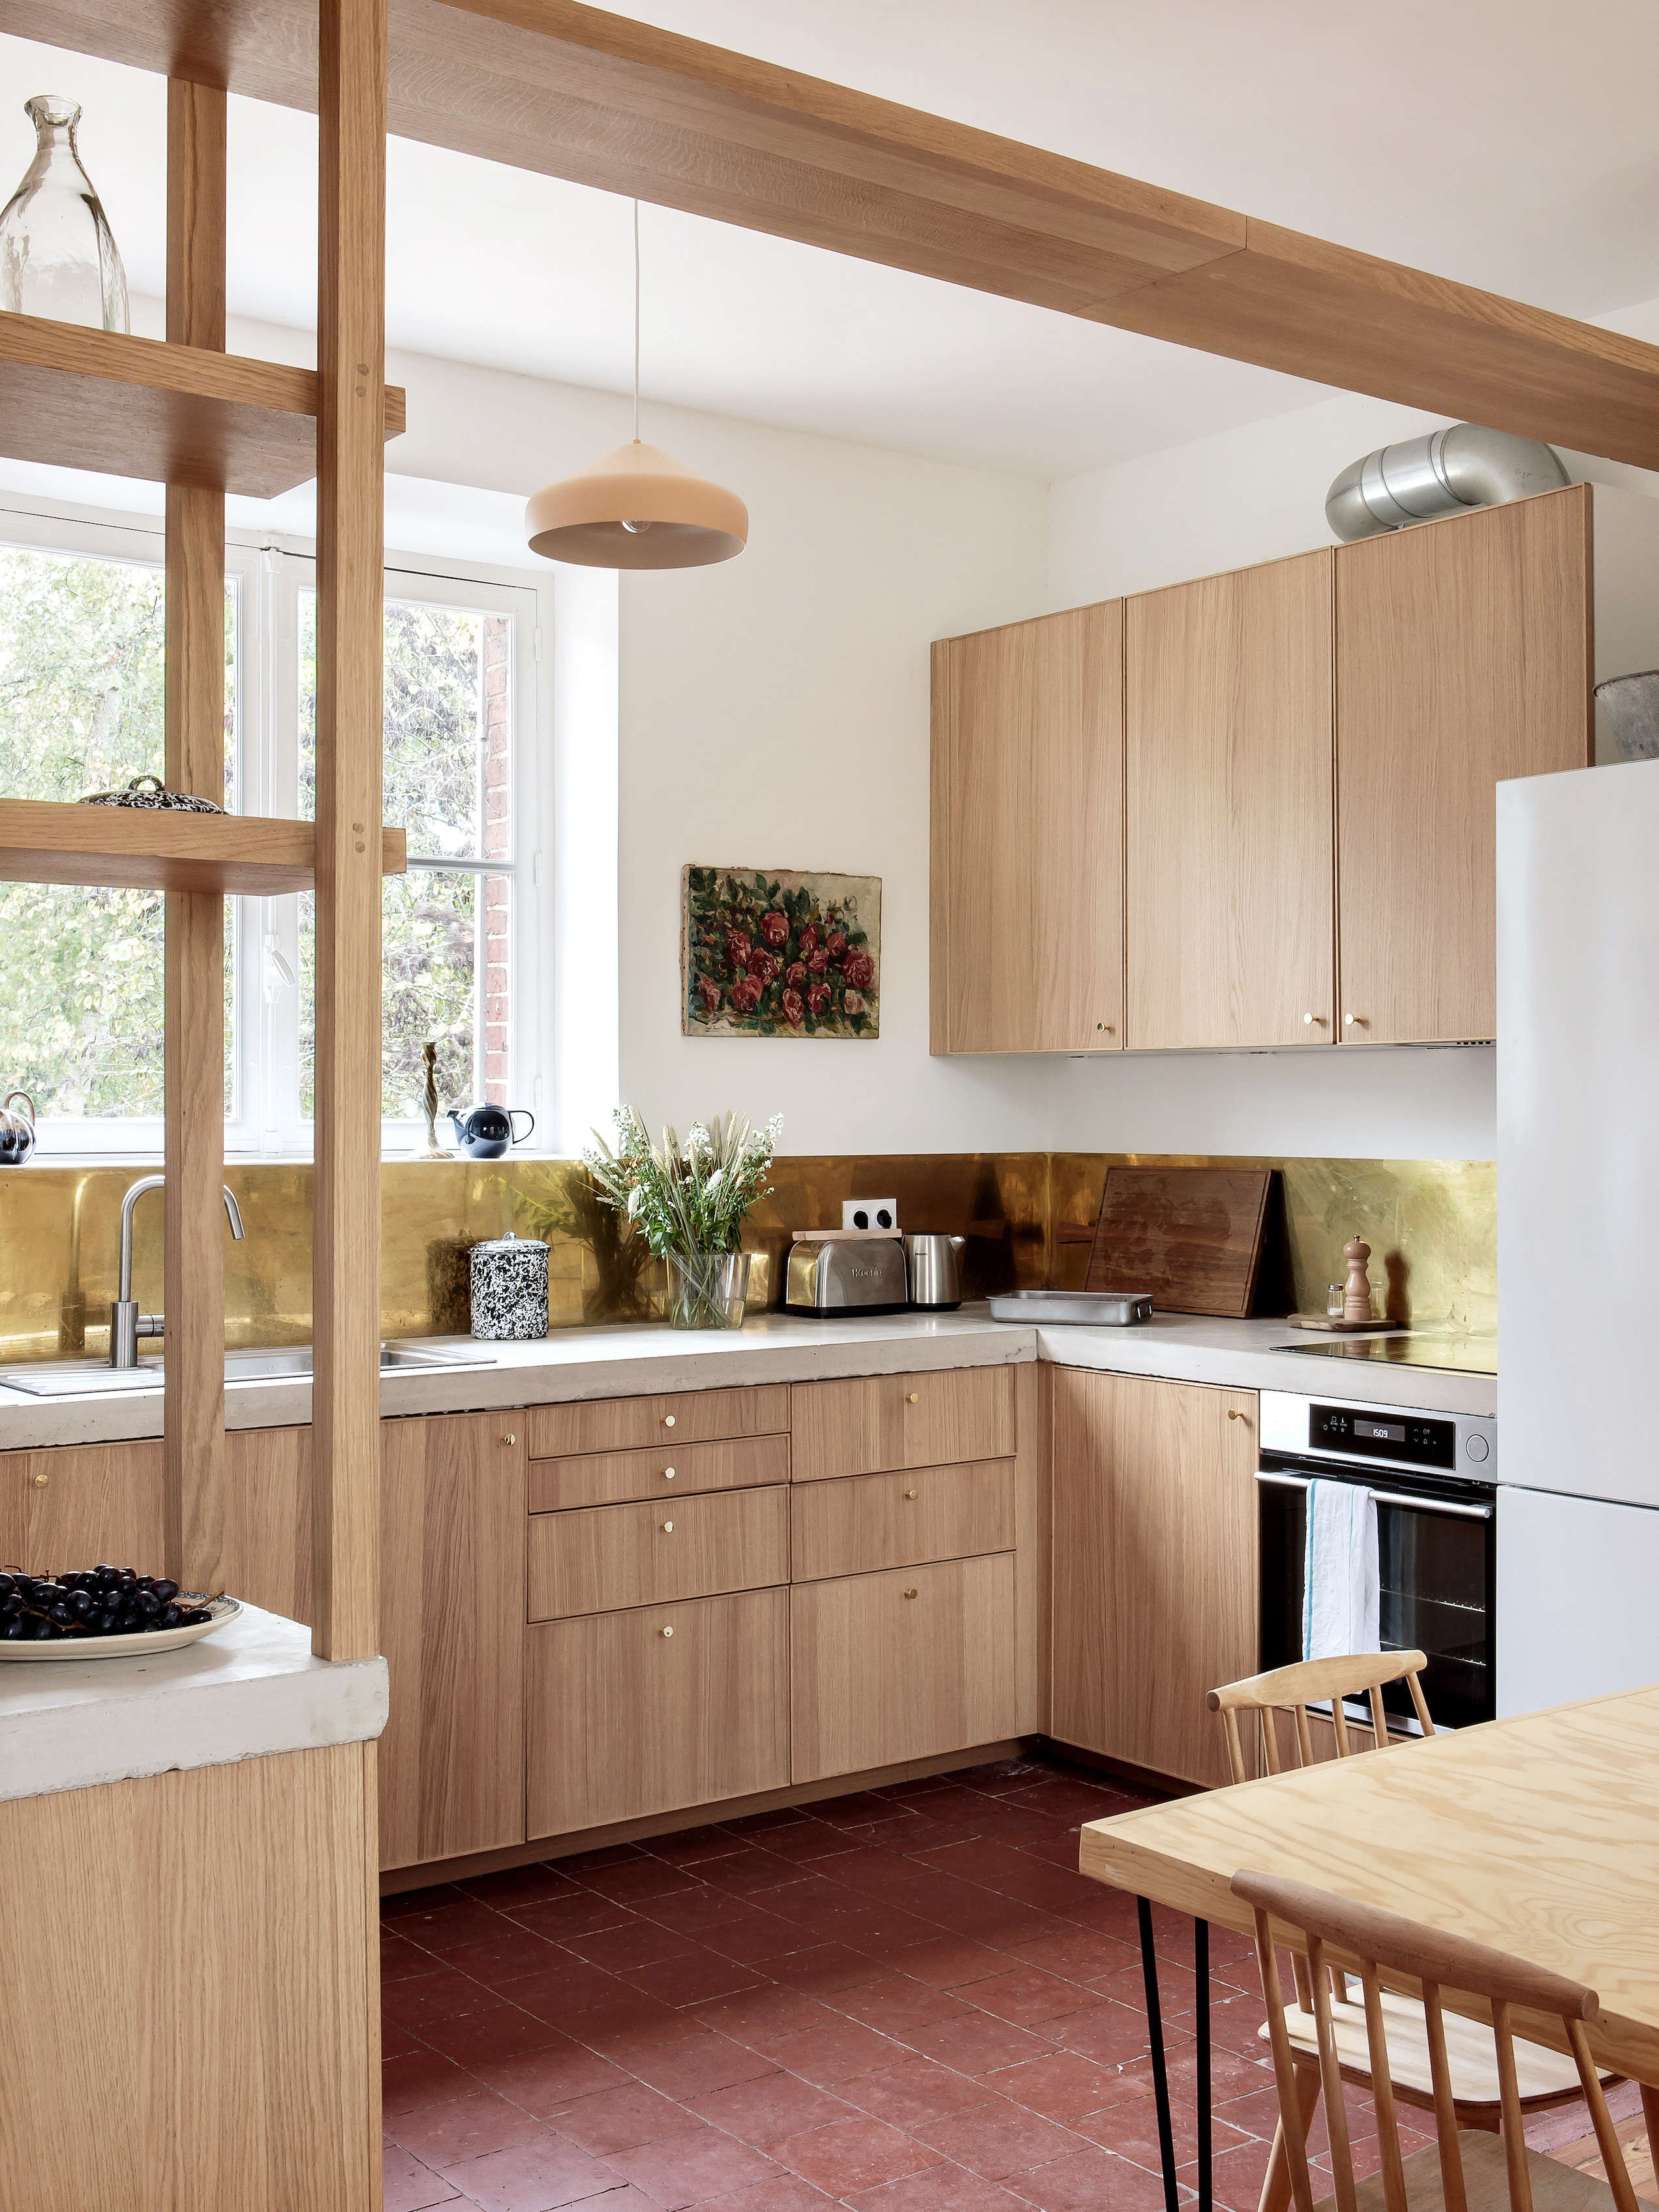 In Praise of Ikea 18 Ikea Kitchens from the Remodelista Archives ...